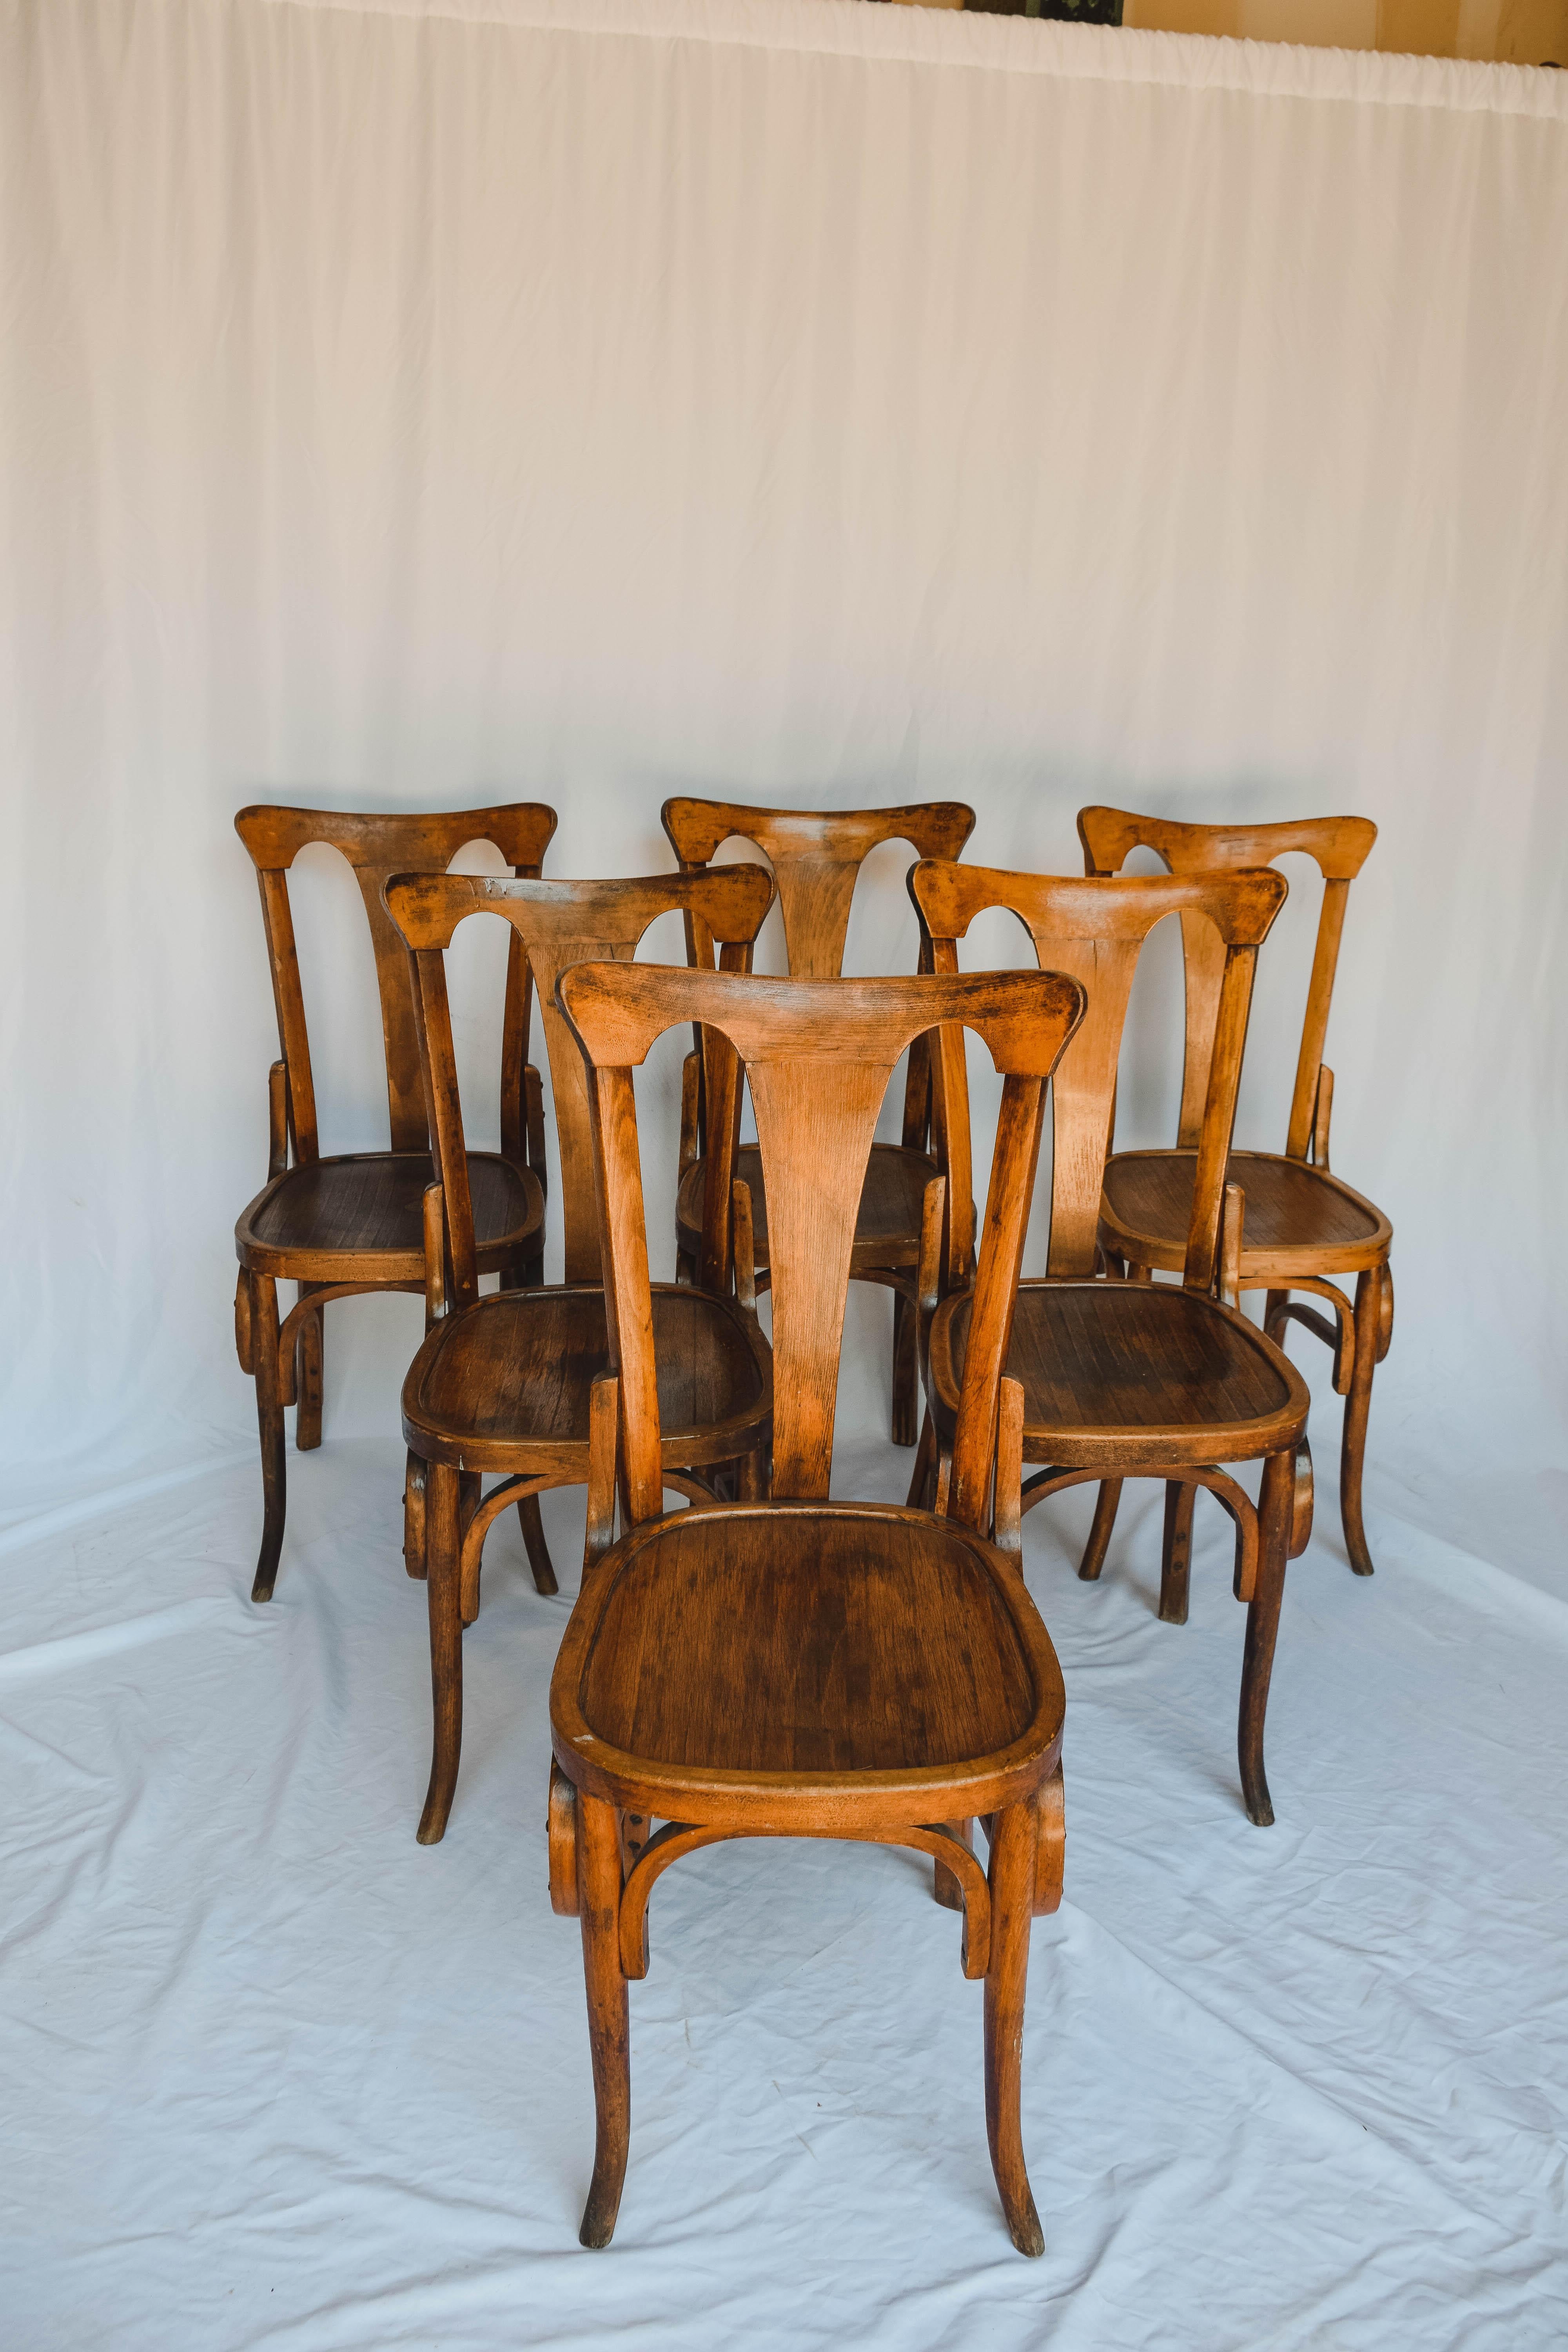 Charming set of 6 Thonet style bistro chairs with bentwood frames. Slatted wood seat. In overall good condition with normal wear. Priced for the set. 20th Century.